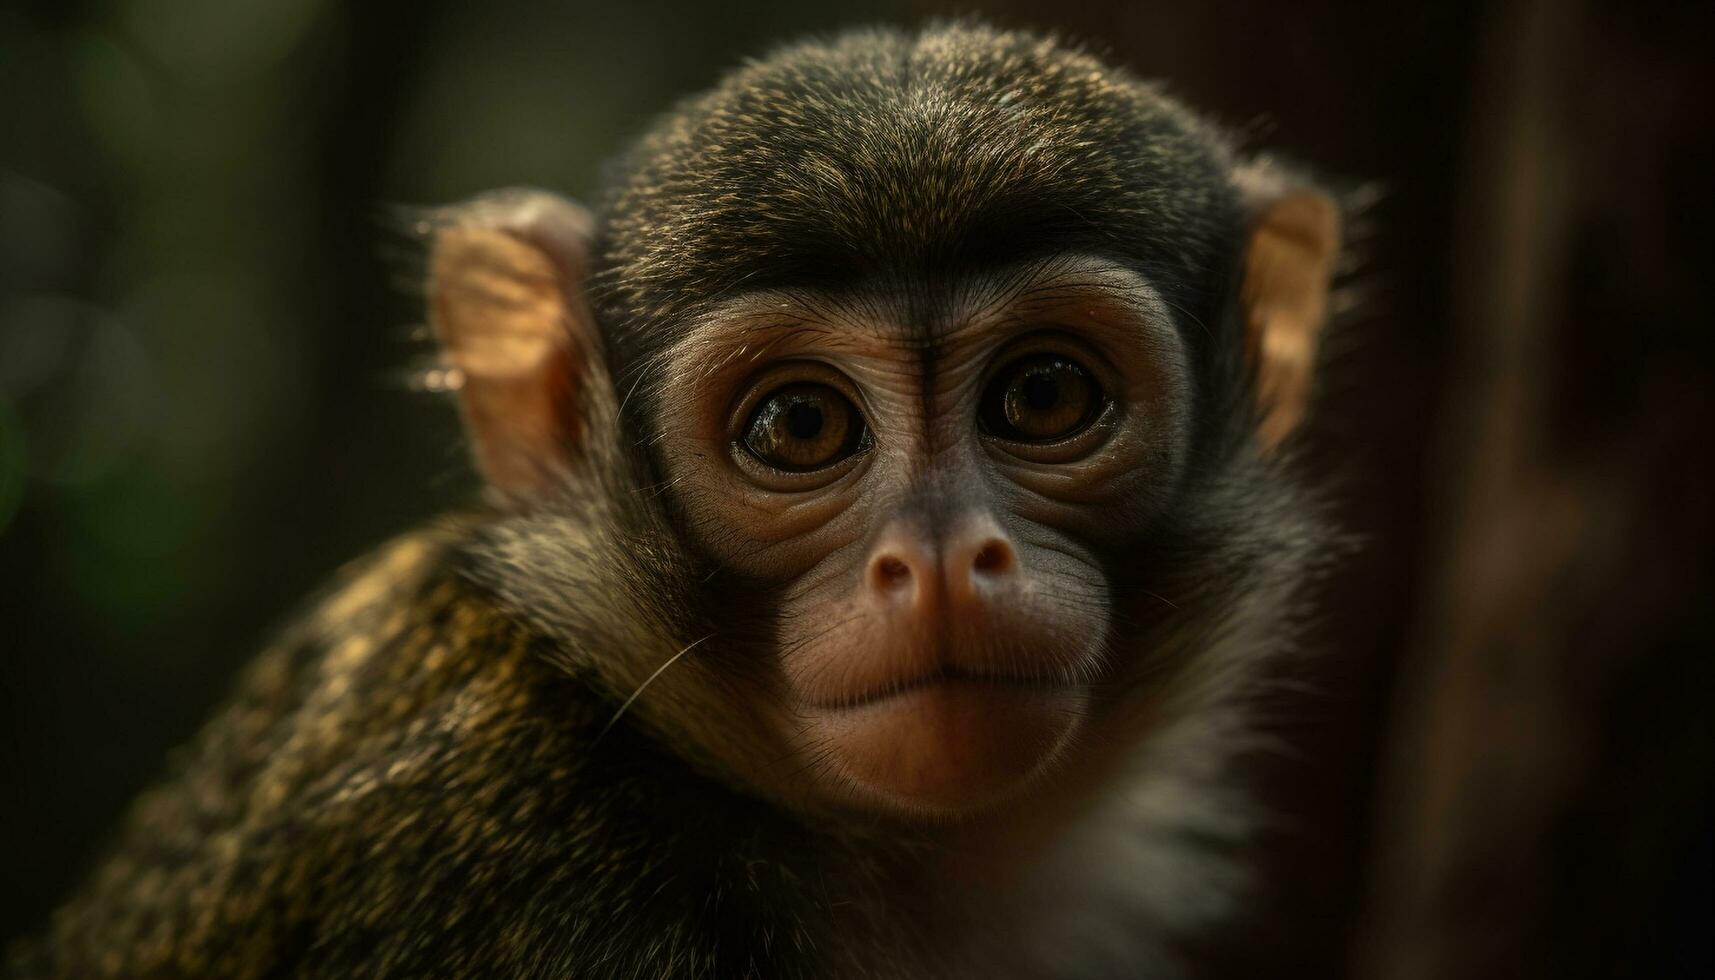 Cute macaque staring, portrait in forest generated by AI photo